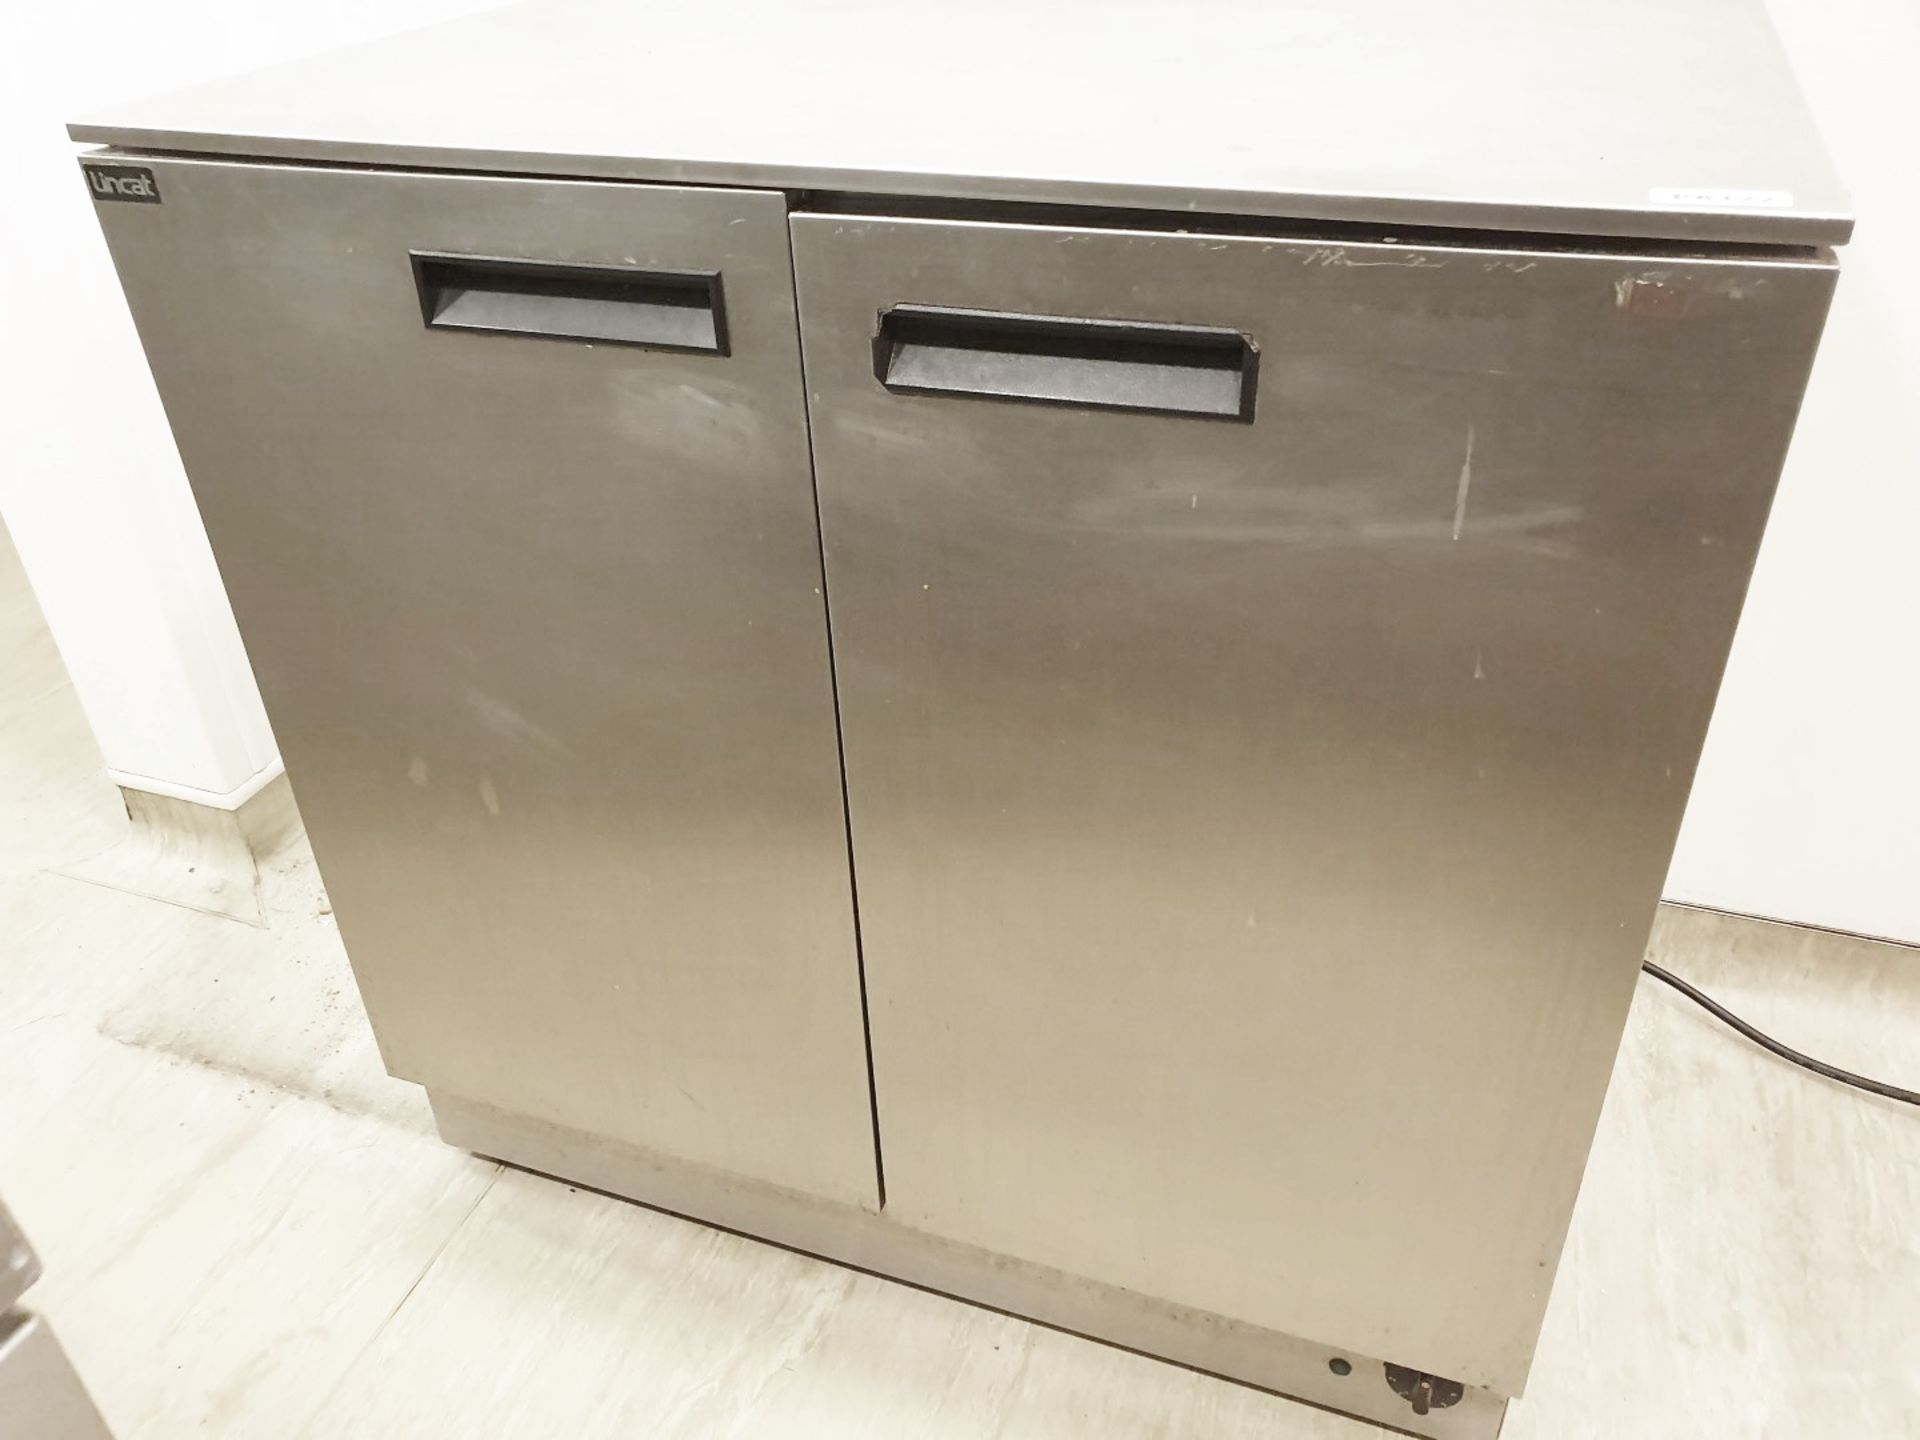 1 x Lincat Plate Warming Cupboard With Stainless Steel Exterior - H90 x W90 x D60 cms - Ref - Image 3 of 4